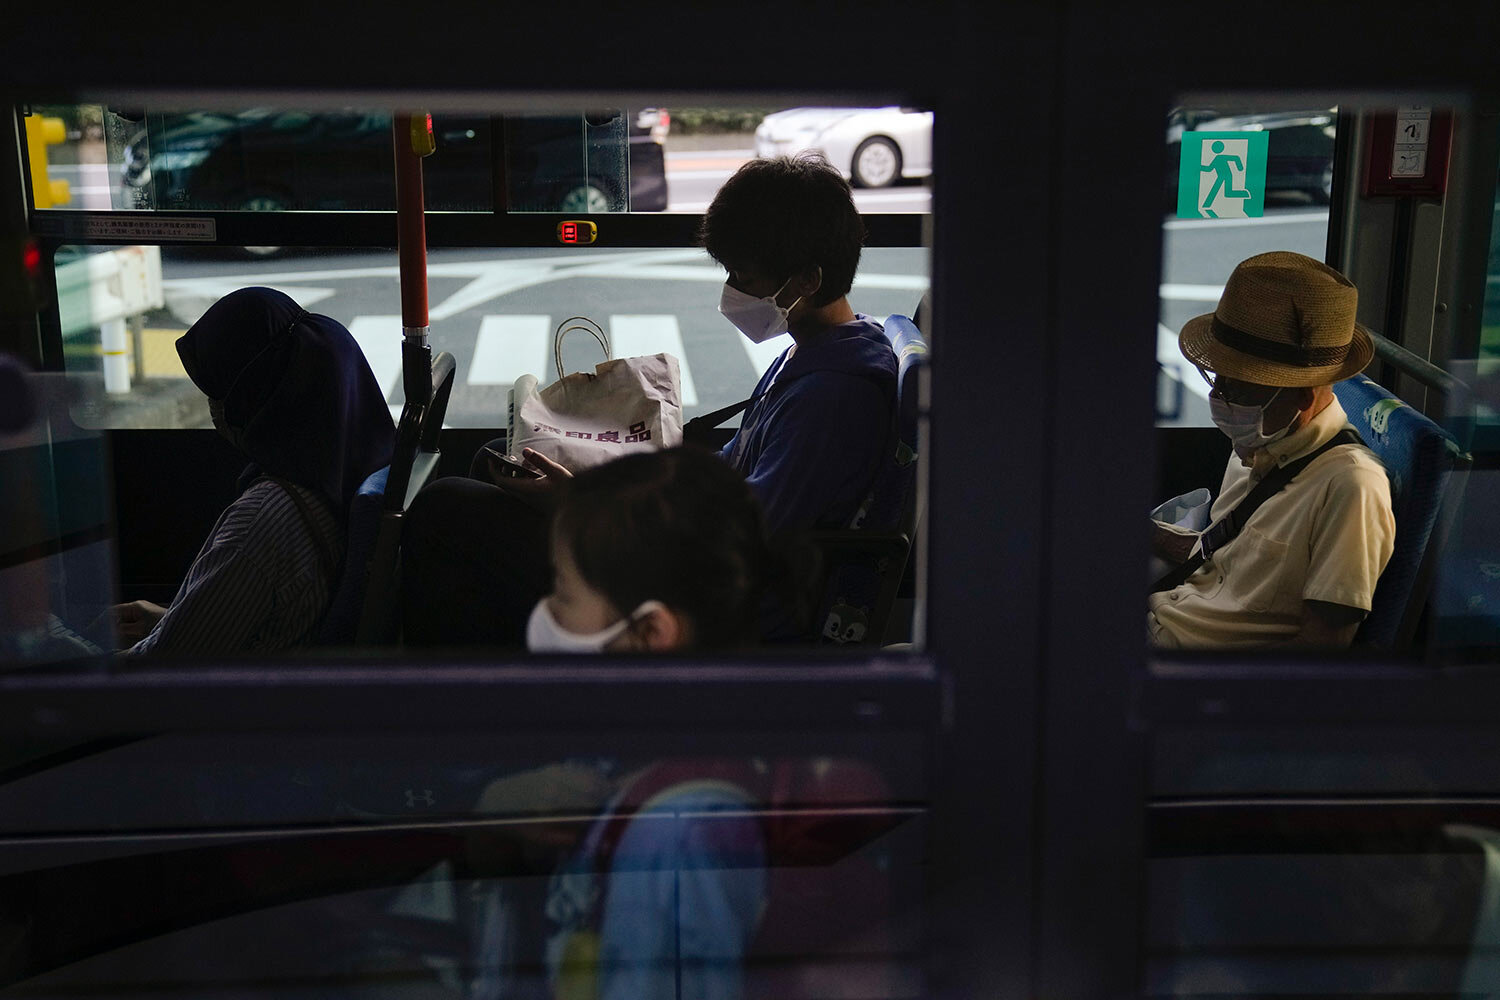  Commuters sit in a bus ahead of the 2020 Summer Olympics, Friday, July 16, 2021, in Tokyo. (AP Photo/Jae C. Hong) 